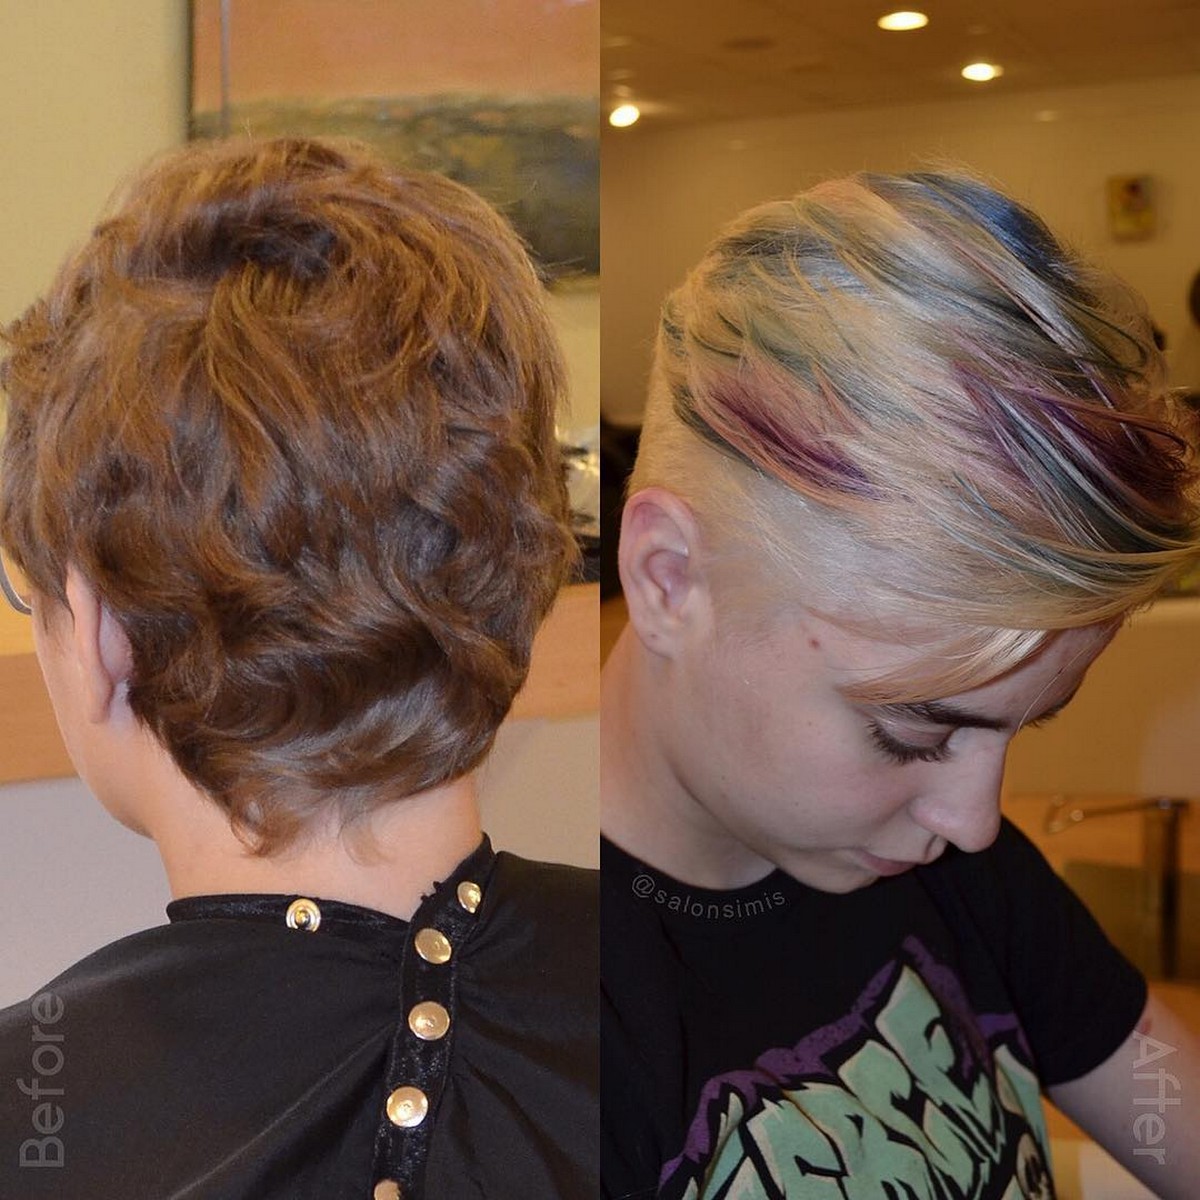 Multi-Colored Highlights On Short Hair